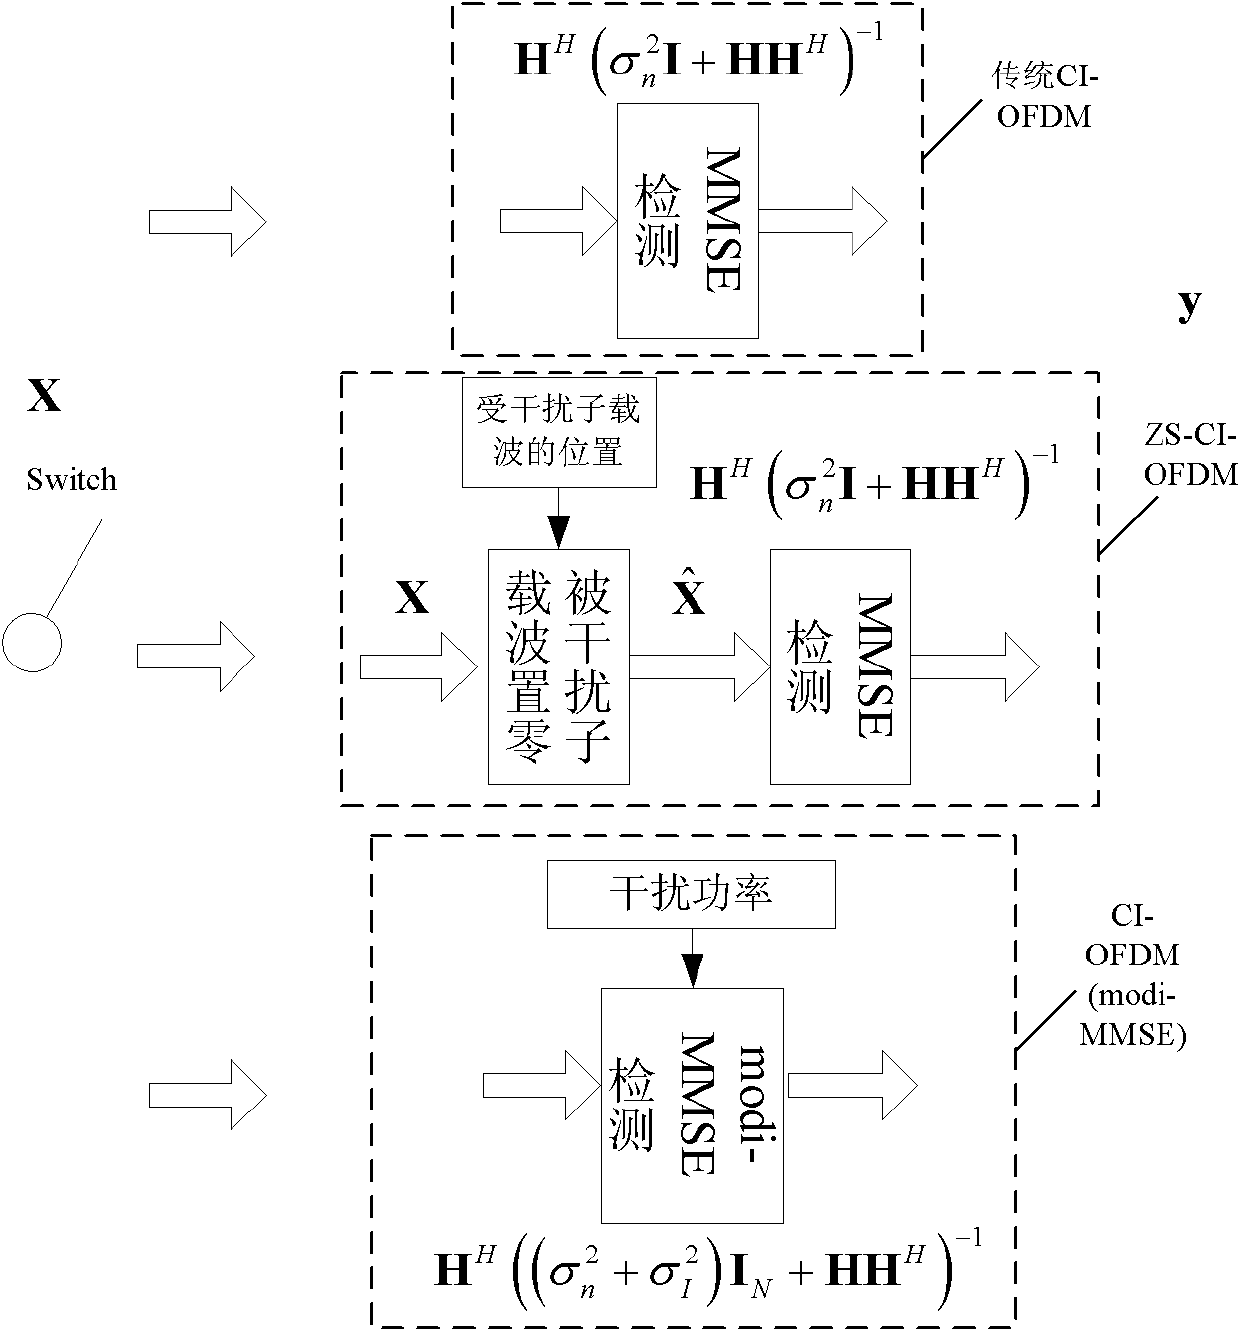 Interference processing method based on carrier interferometry orthogonal frequency division multiplexing (CI-OFDM) system